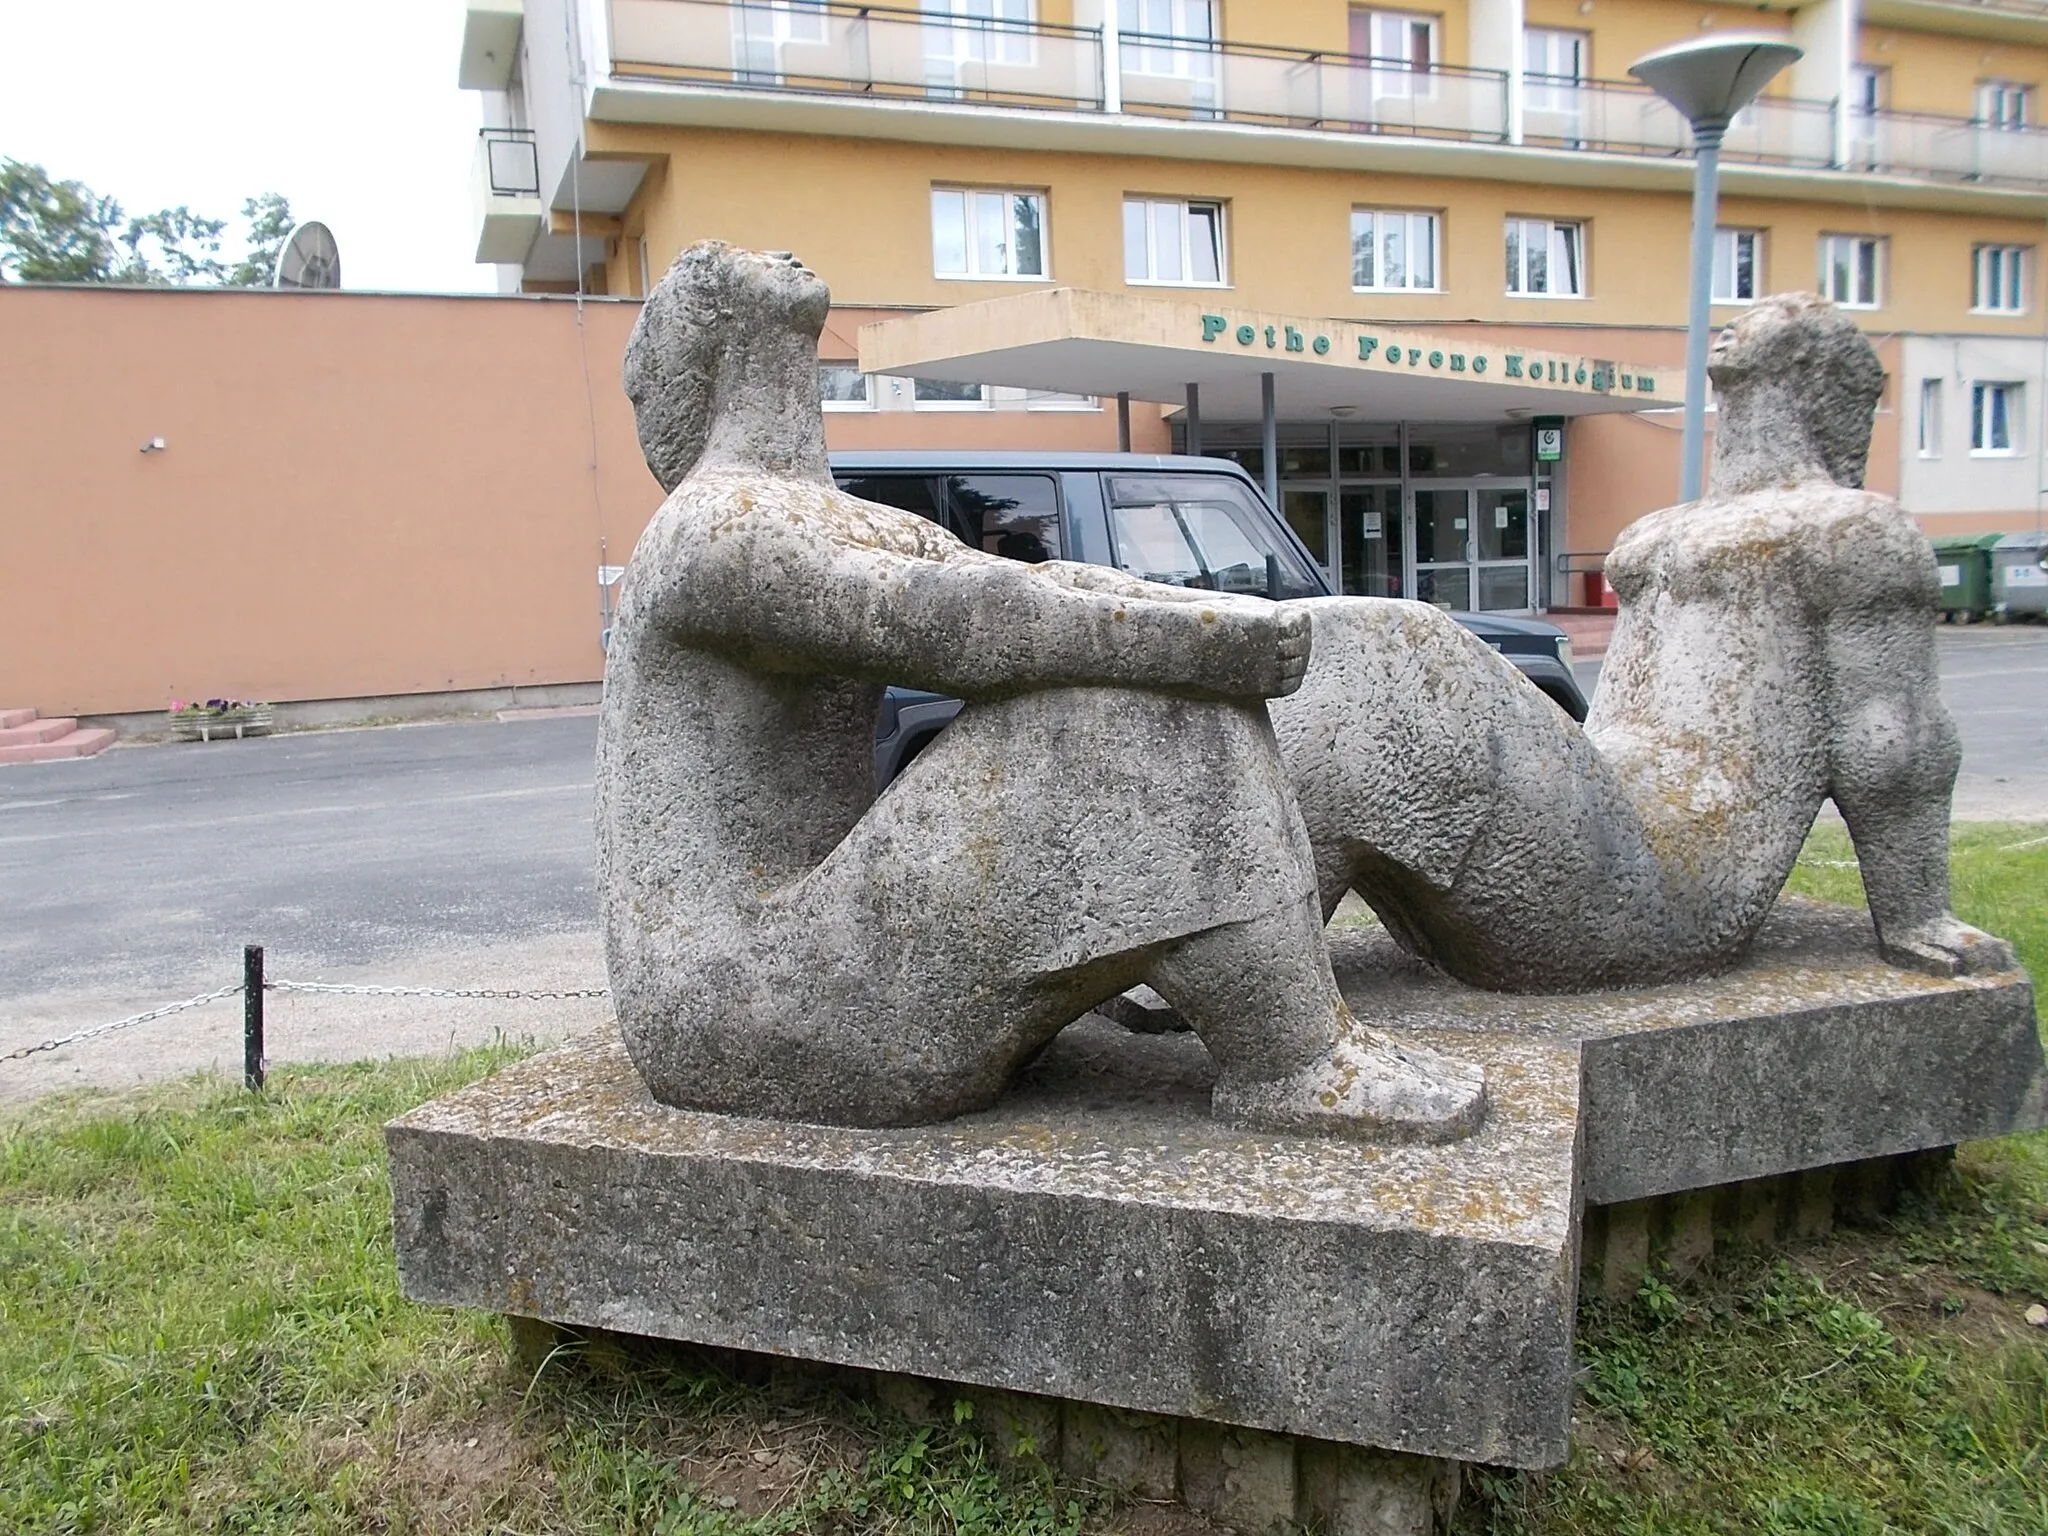 Photo showing: : Statue of Two female singers by István Tar (1967) at Pethe Ferenc student housing. - Keszthely, Zala  County, Hungary.